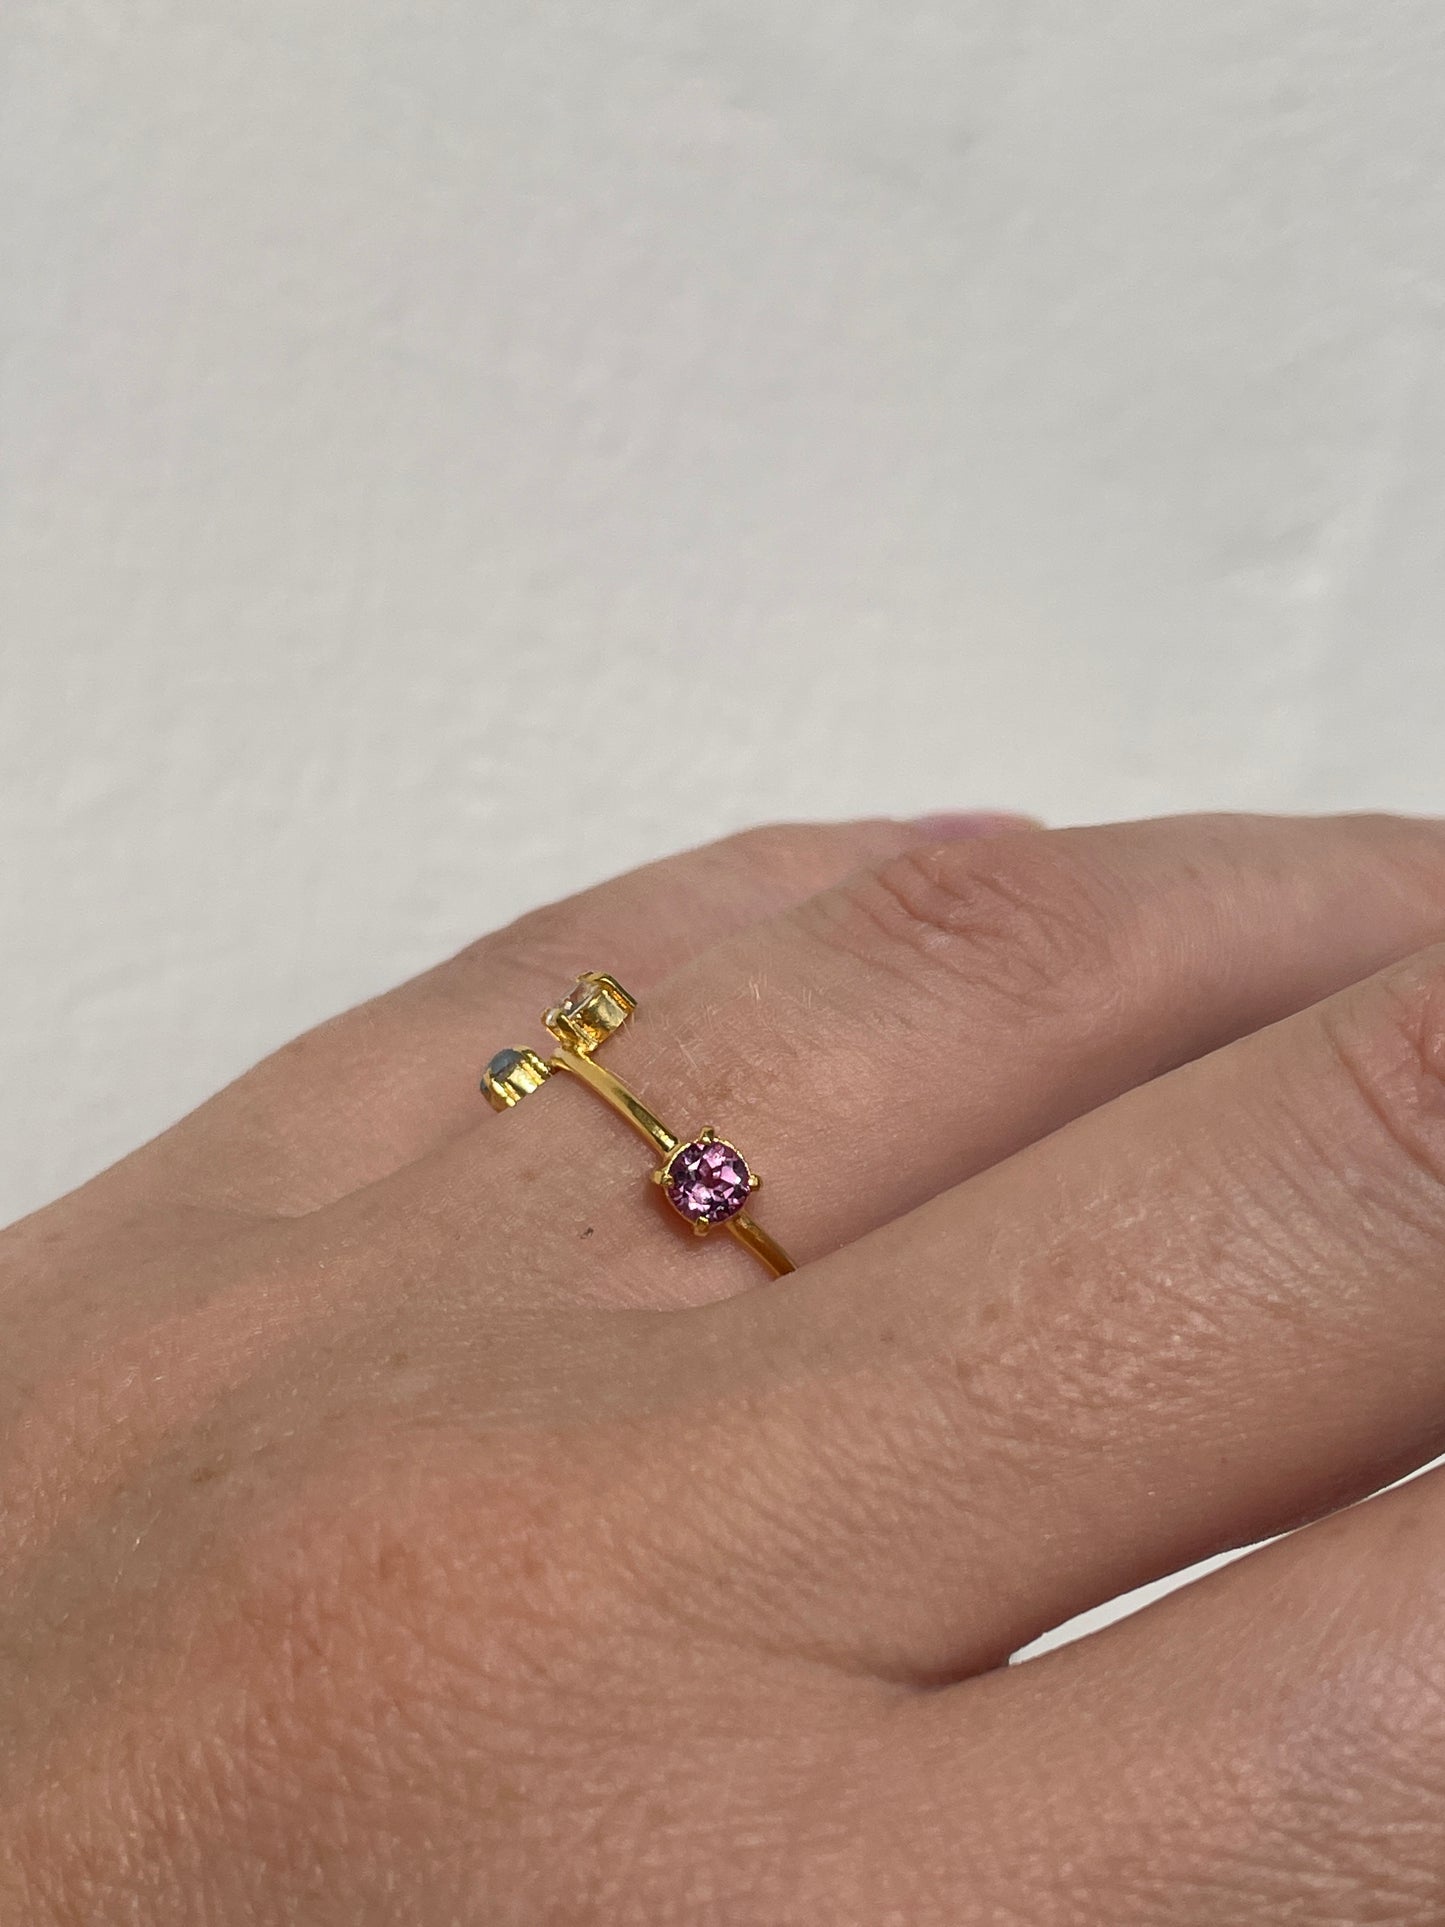 Galaxy Ring Gold with Pink, Blue & White Sapphires - size 7